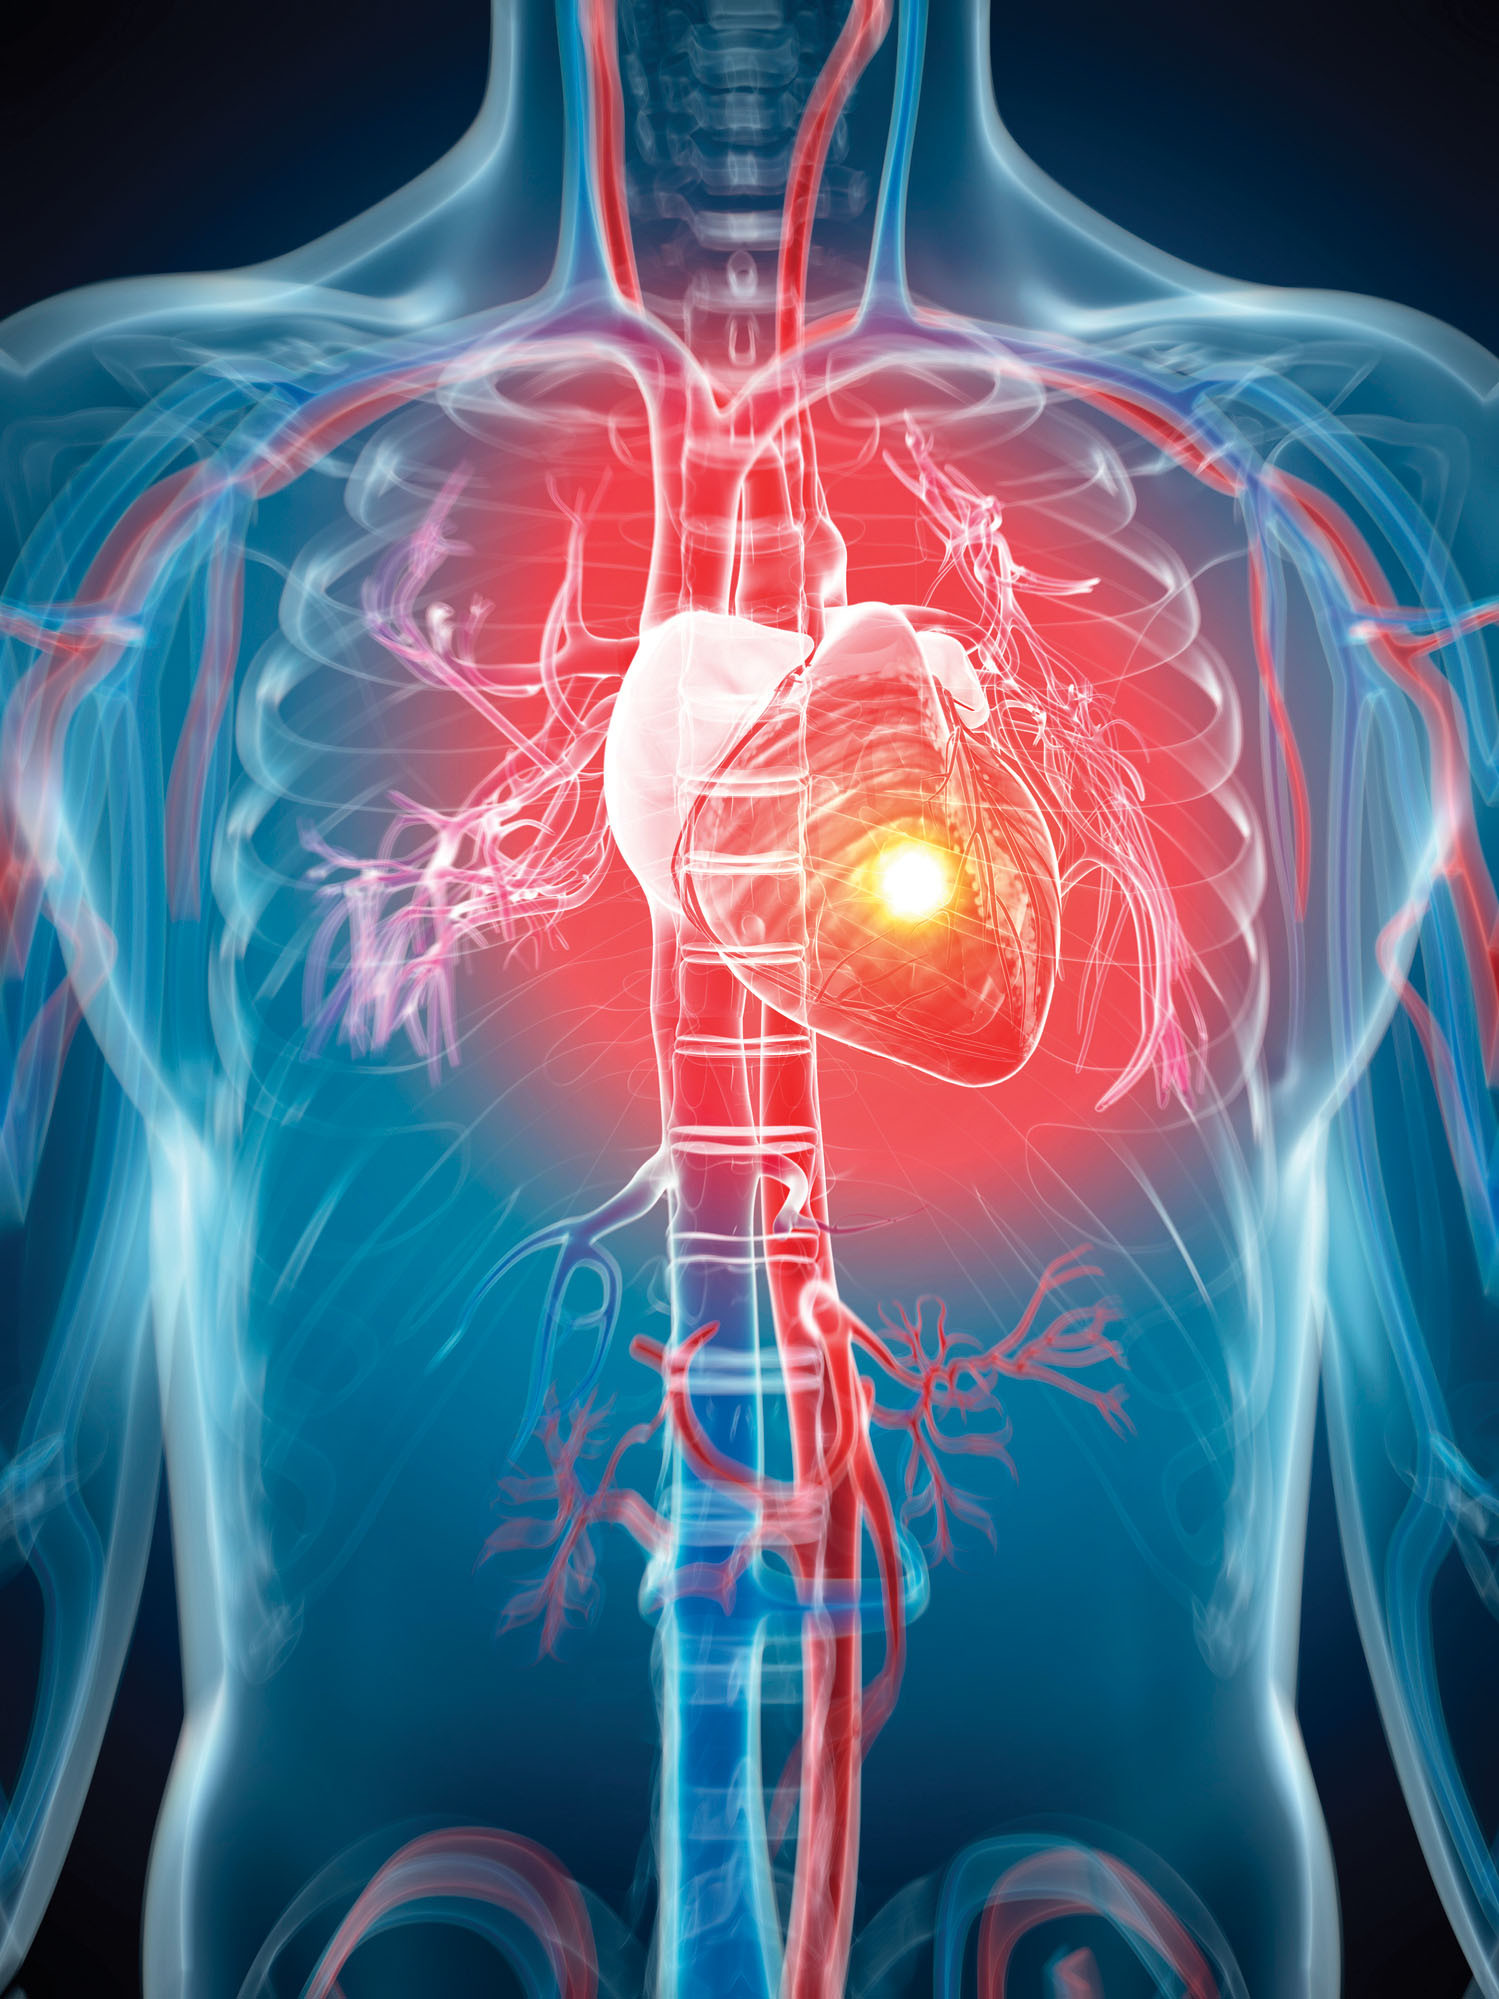 photo-illustration of a human torso showing a transparent body and a glowing red heart